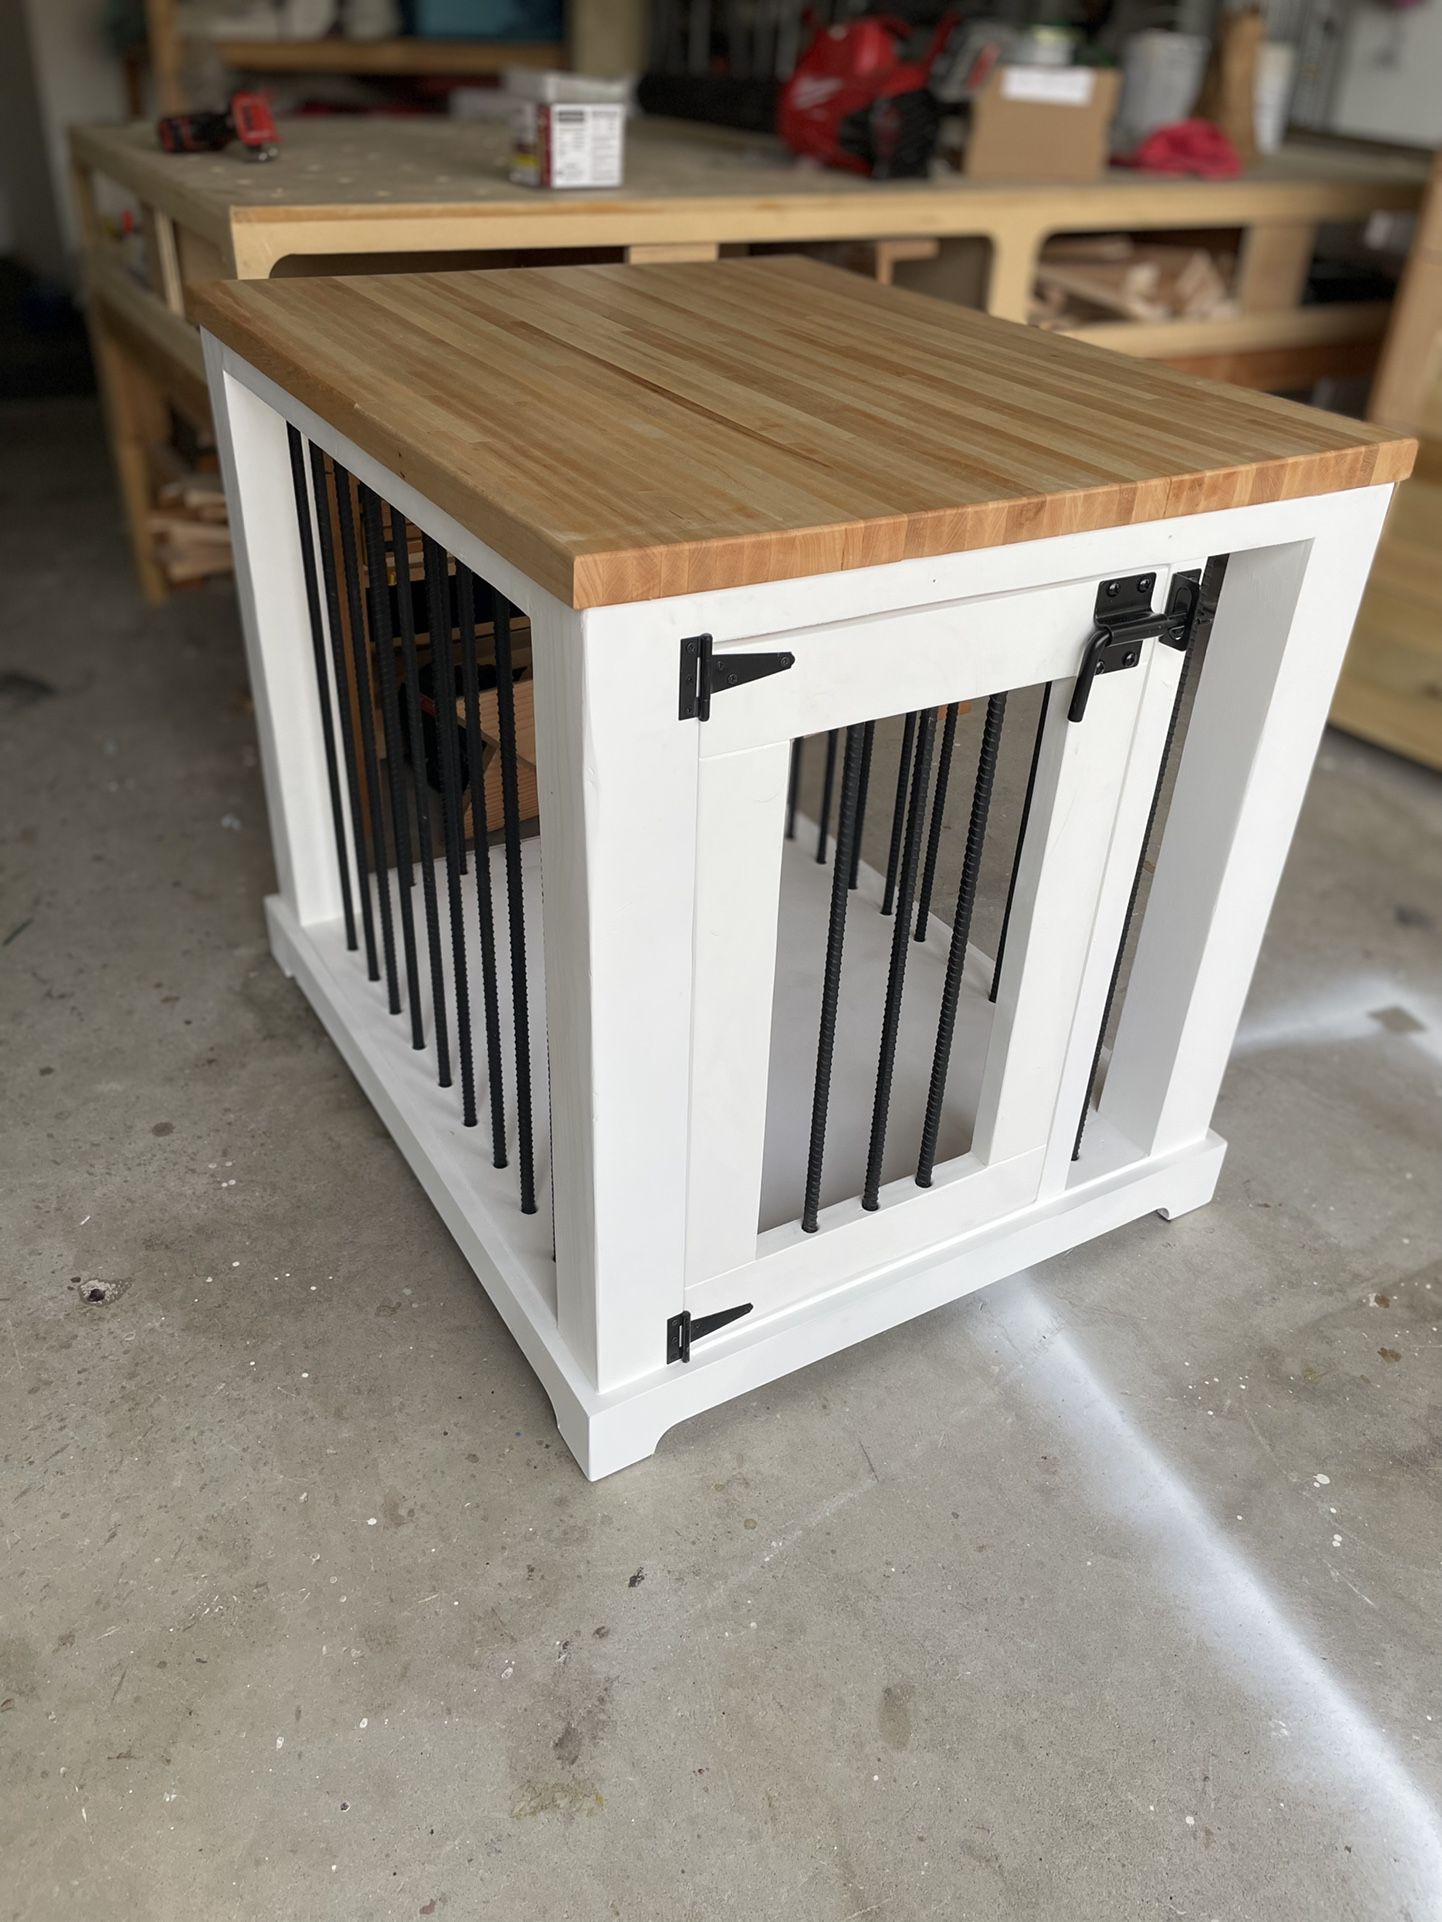 Large Rustic Dog Crate